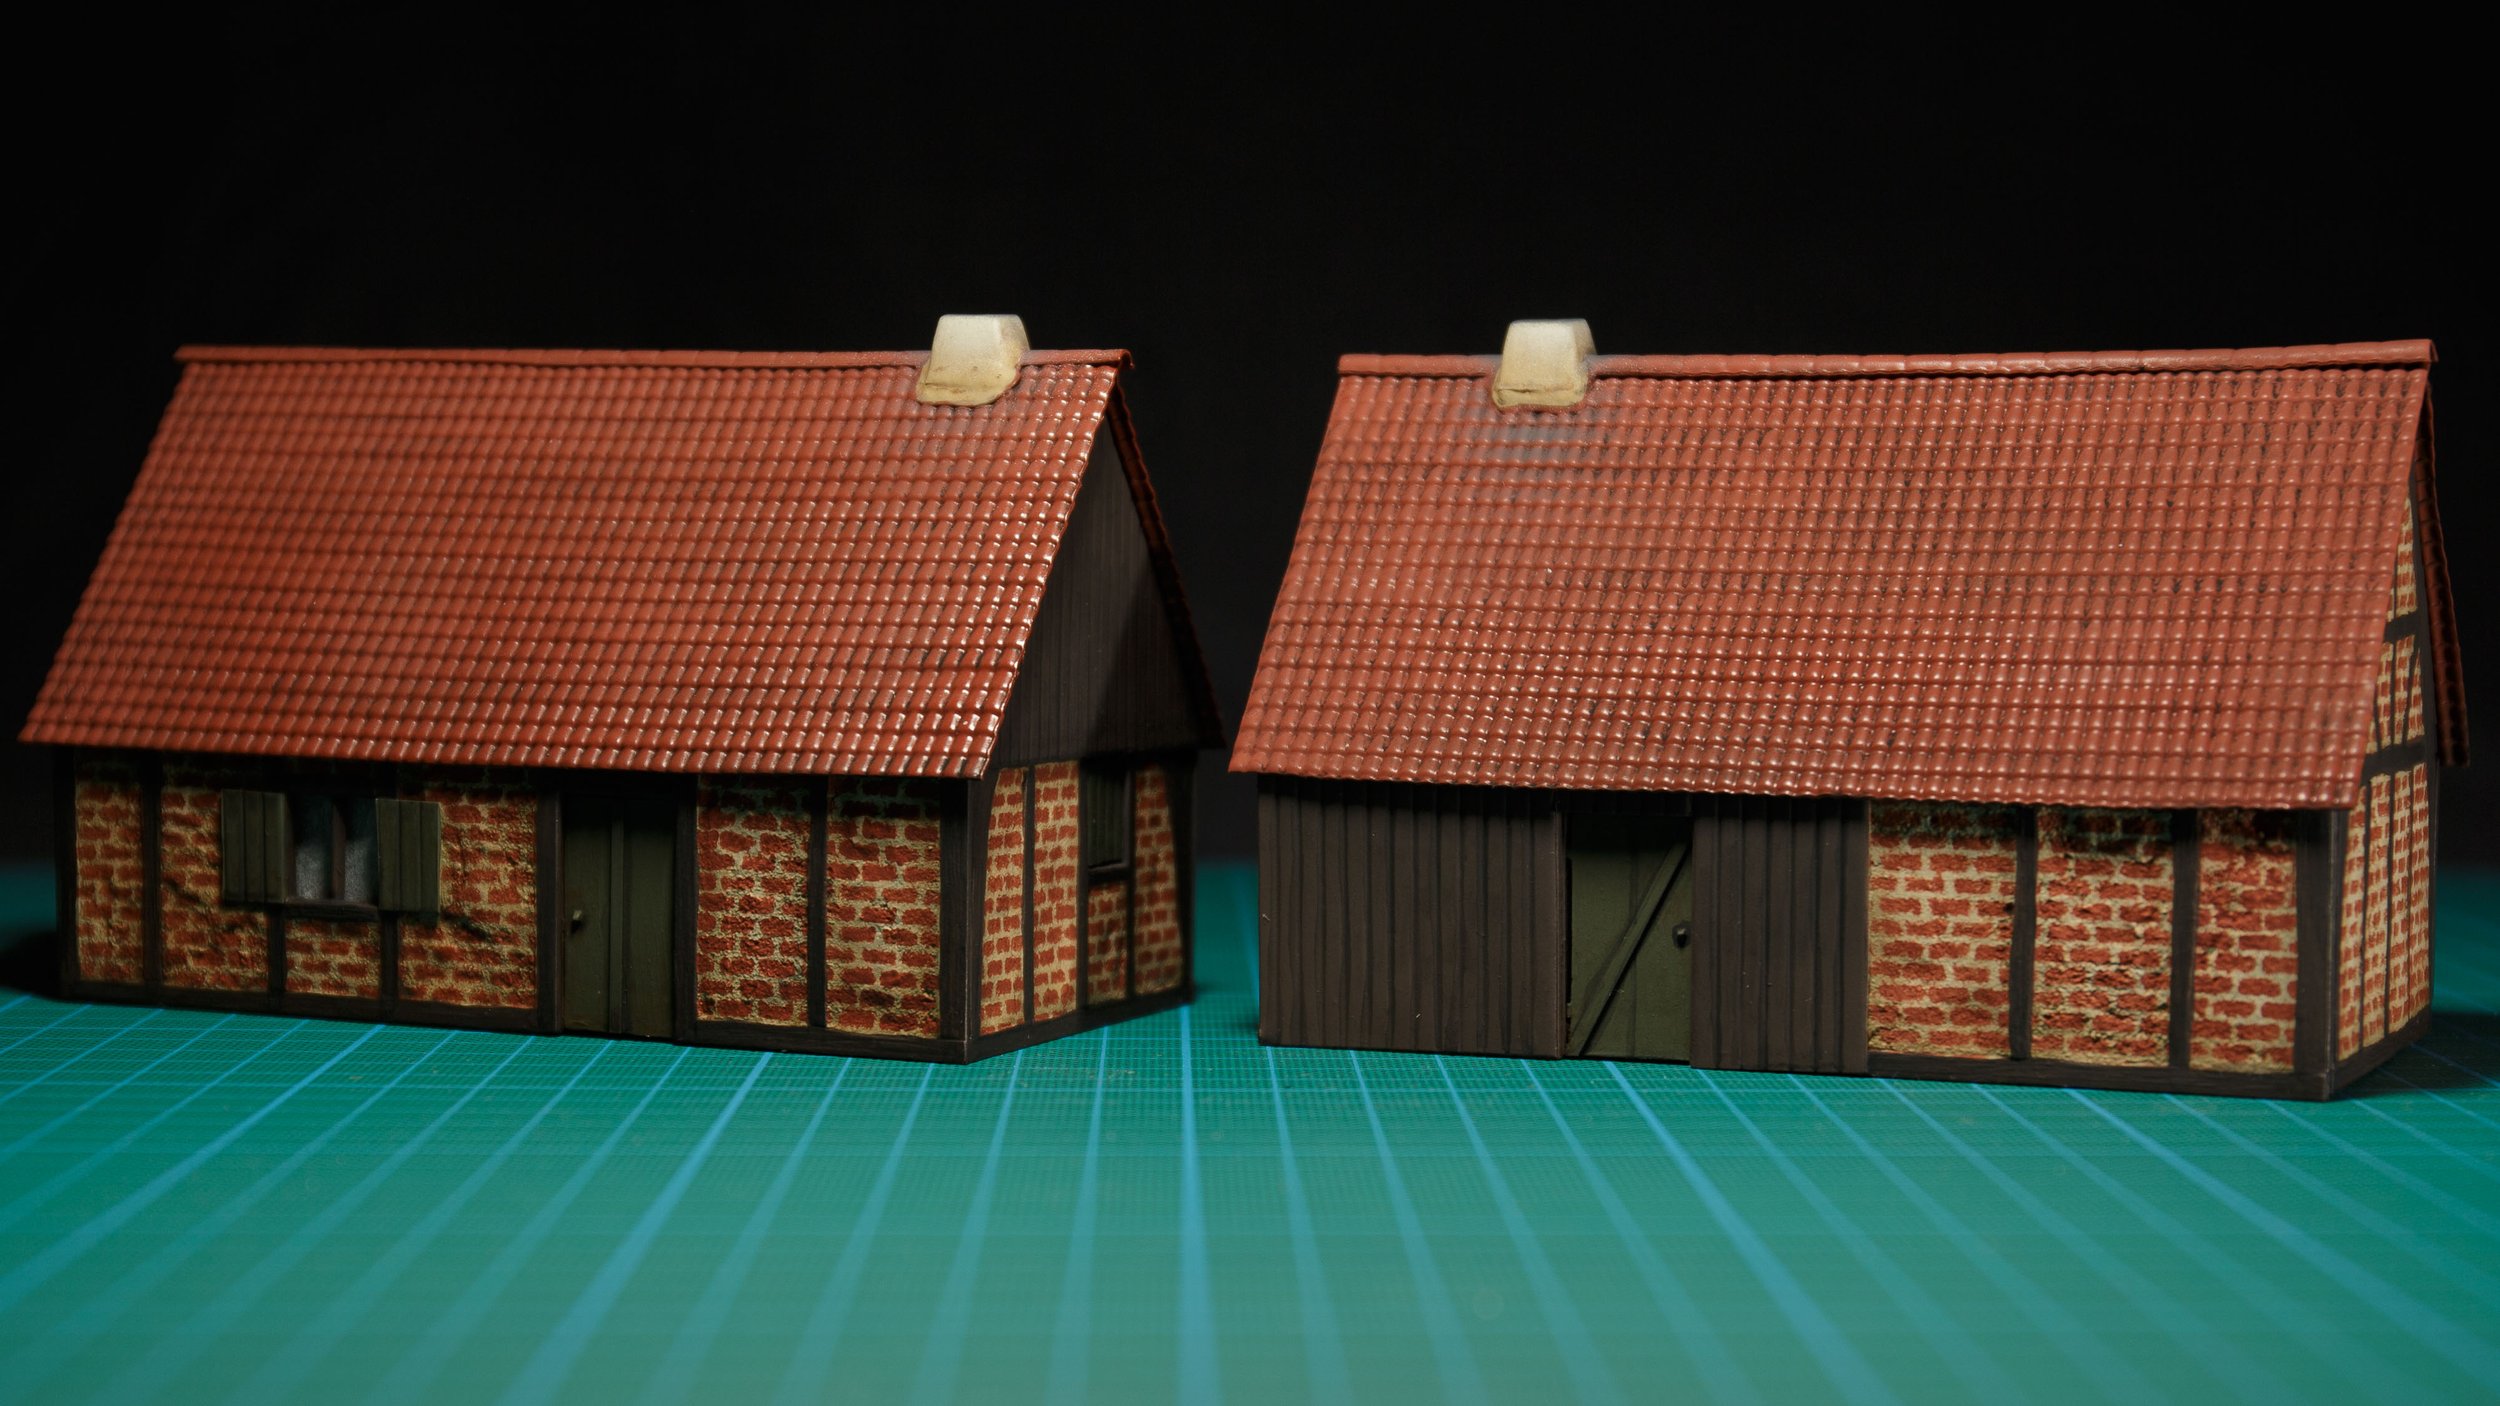  The combination of the bricks and the tiled roof makes these look very different than the original kit. 